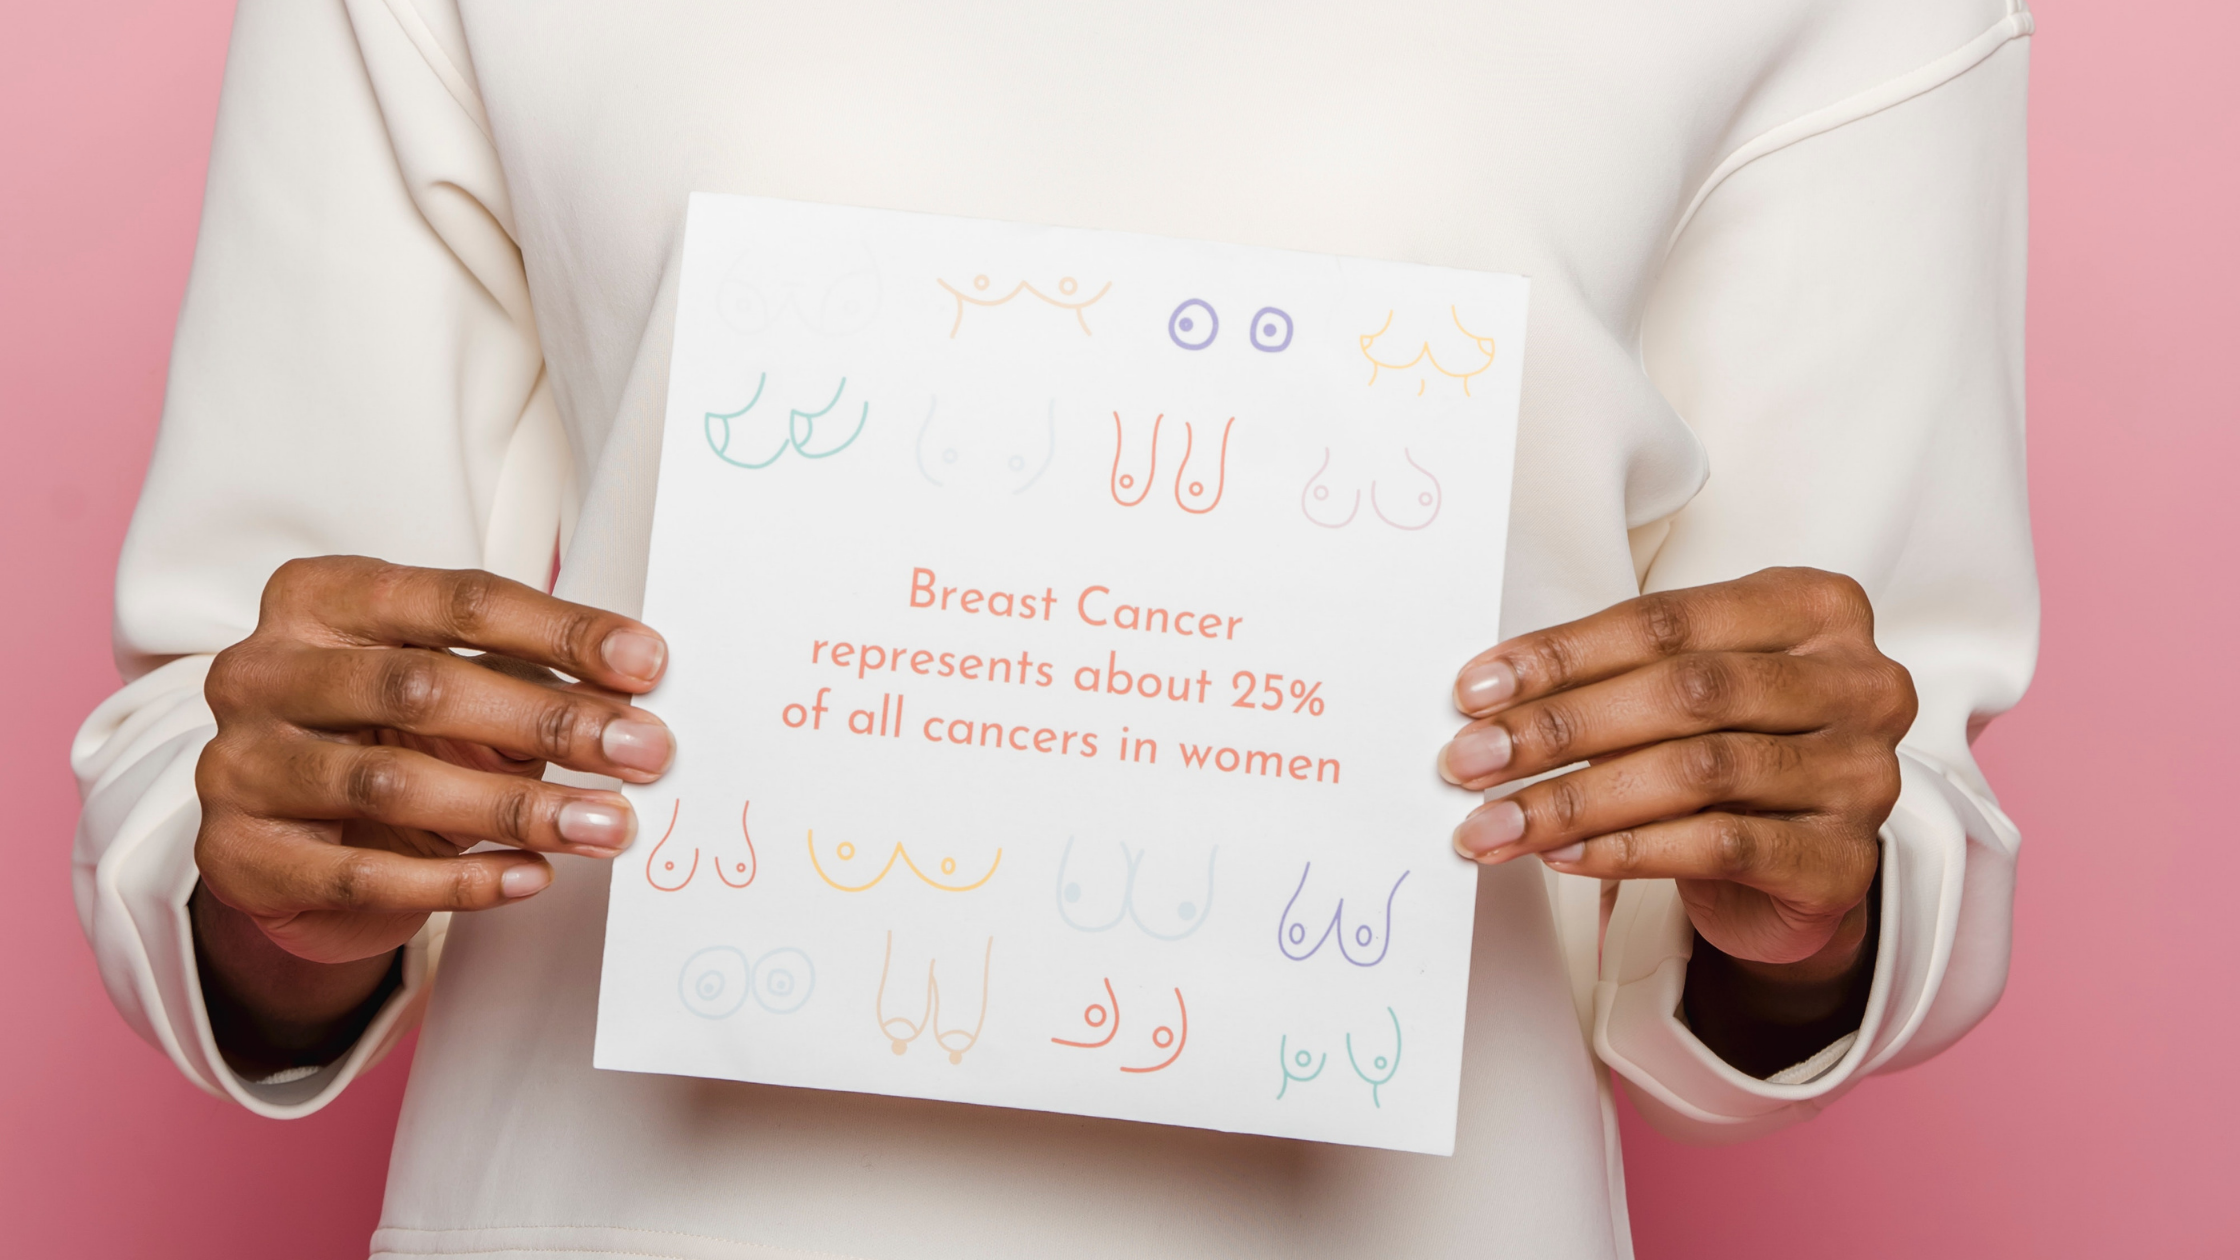 A woman holding a sign saying Breast Cancer represents 25% of all cancers in women